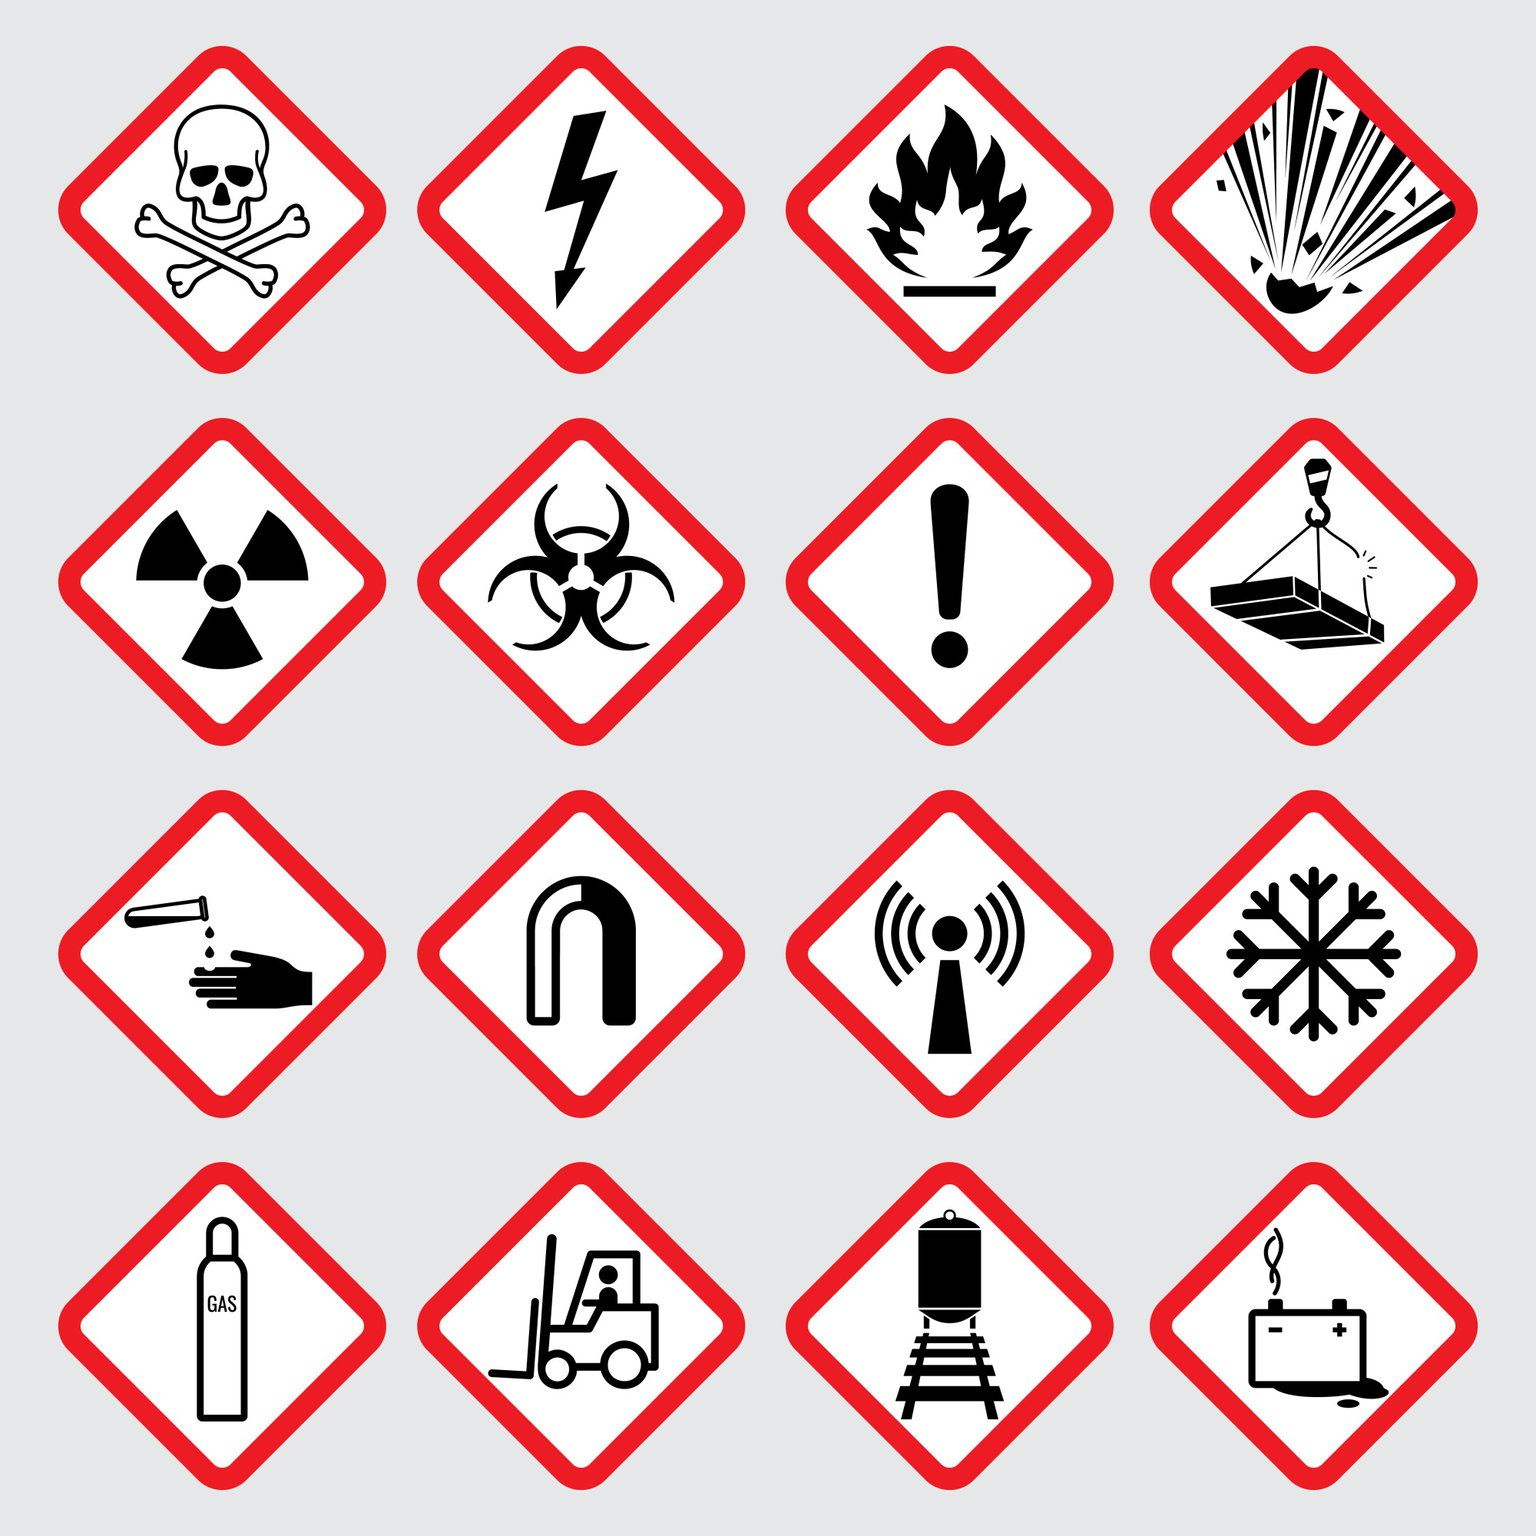 Safety Data Sheets: Who is Responsible for Providing SDS?